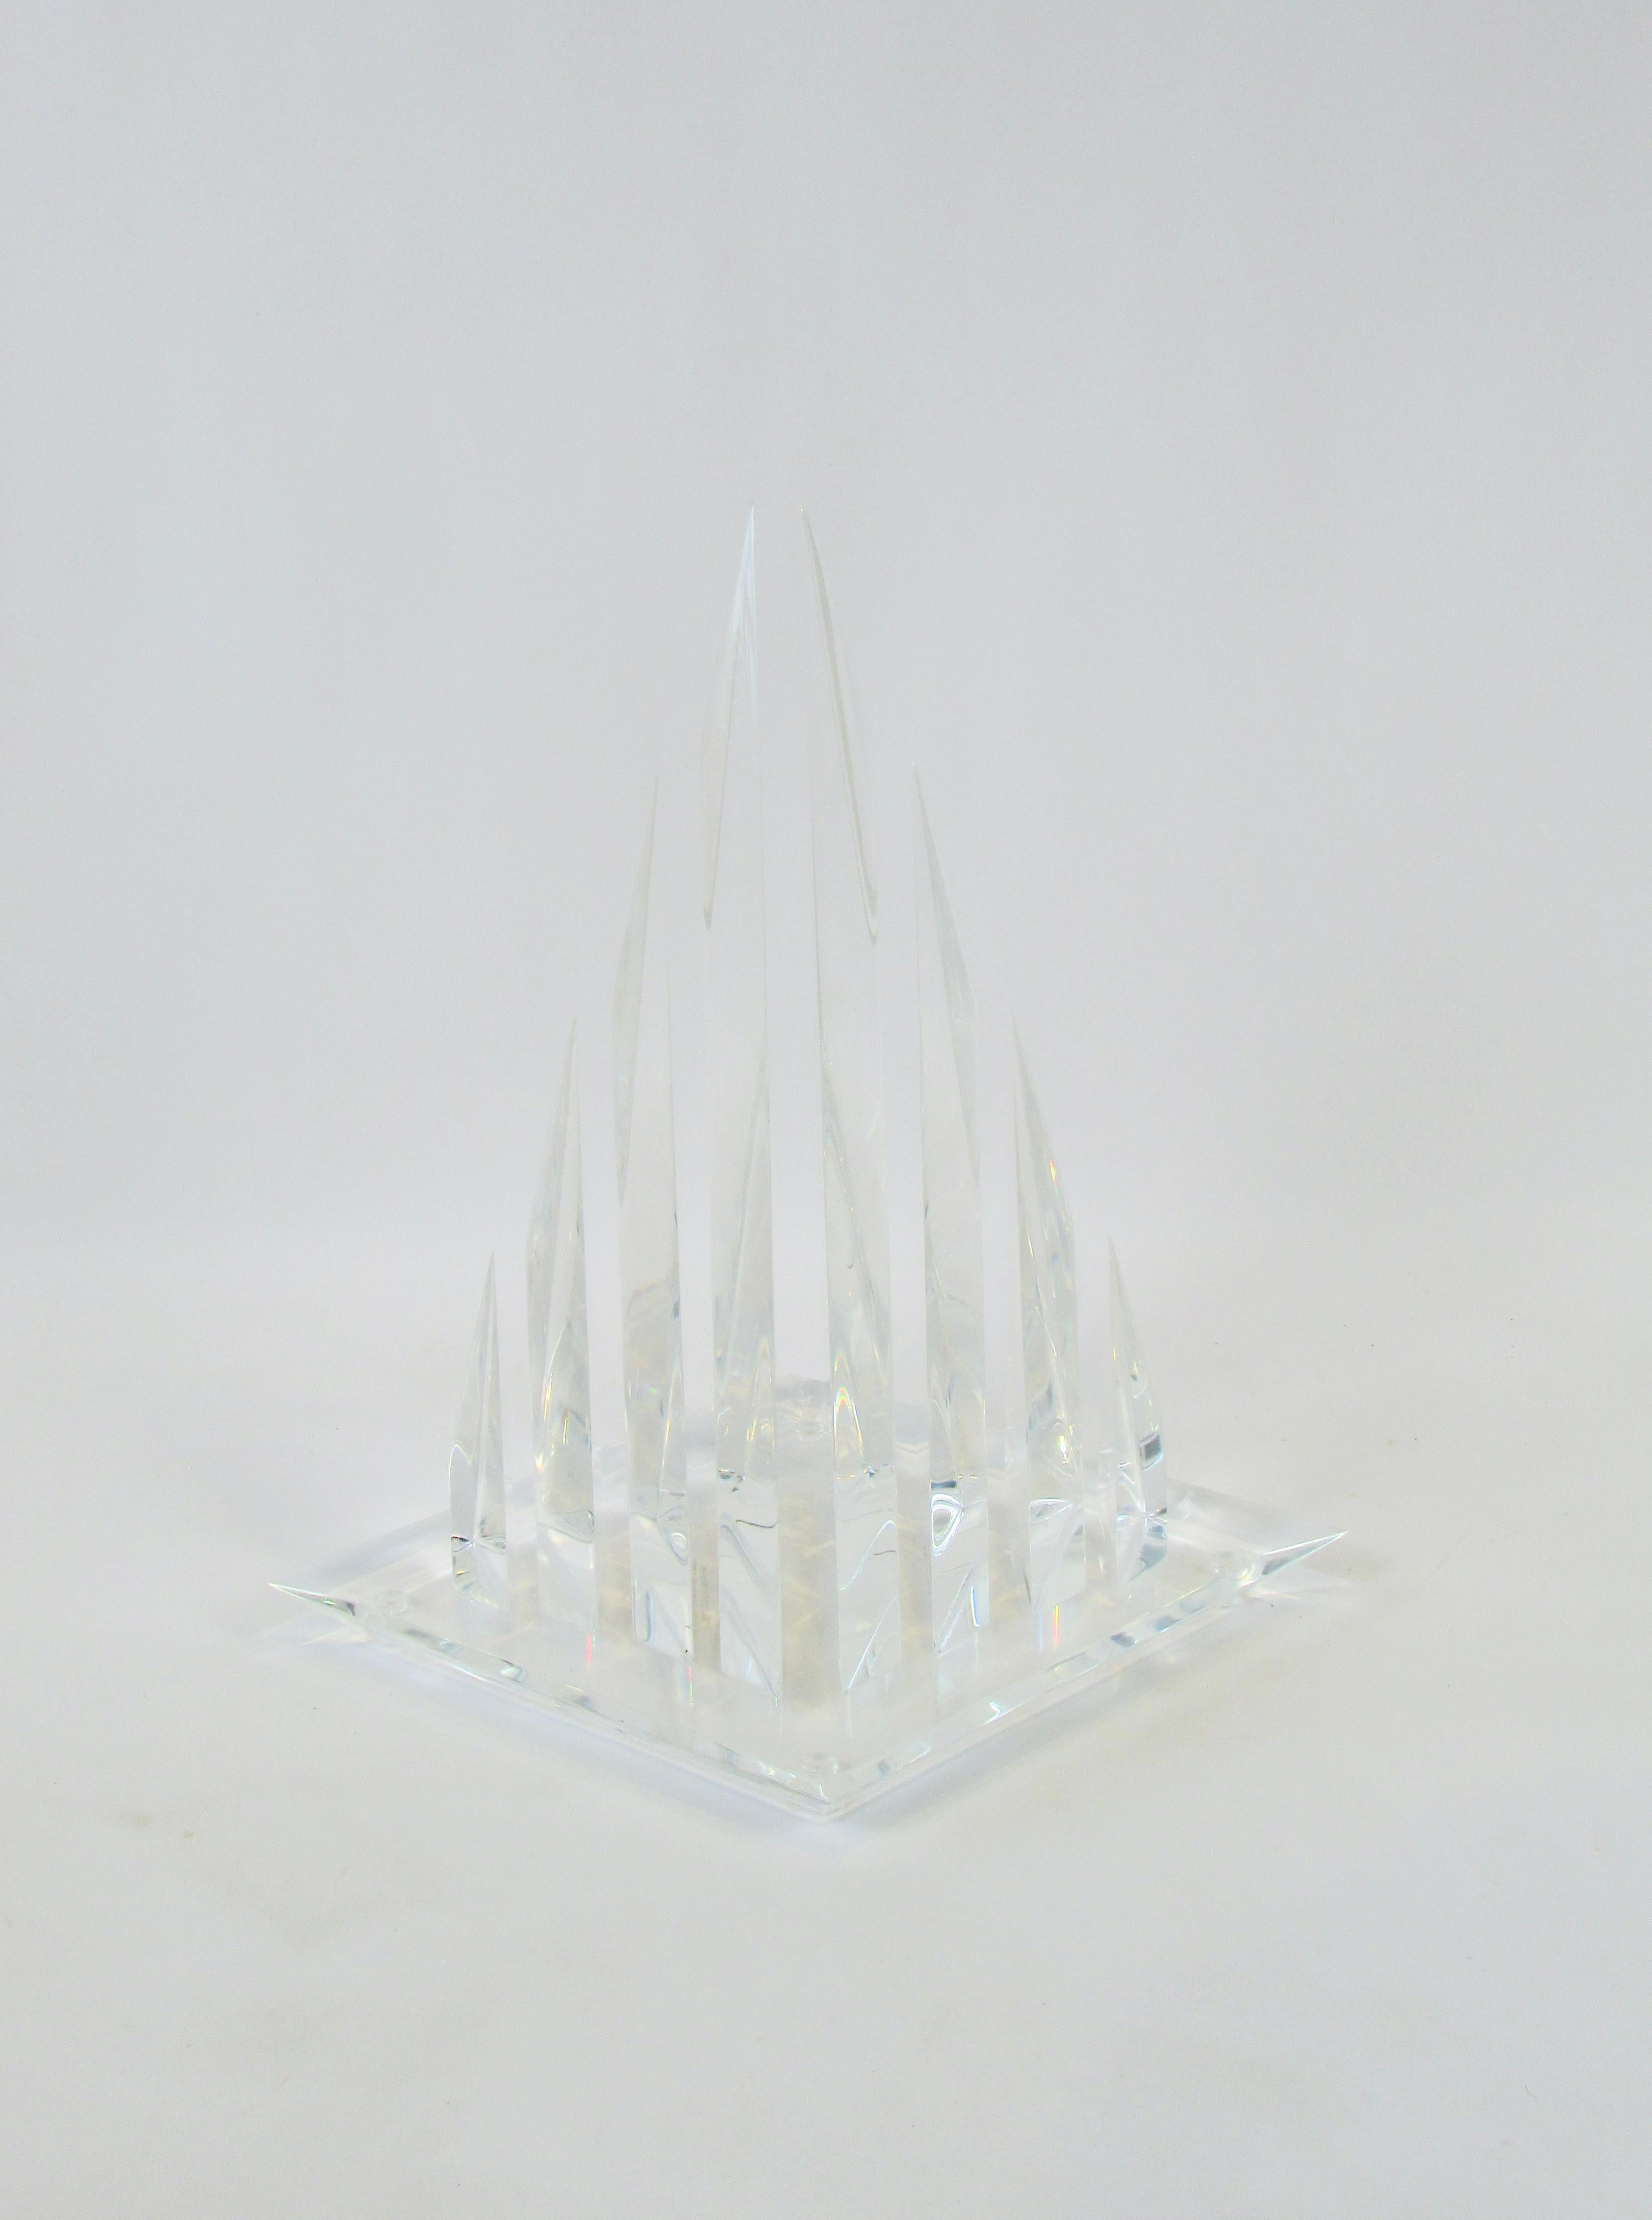 Hivo Van Teal Segmented Lucite Pyramid, Triangle Sculpture For Sale 4